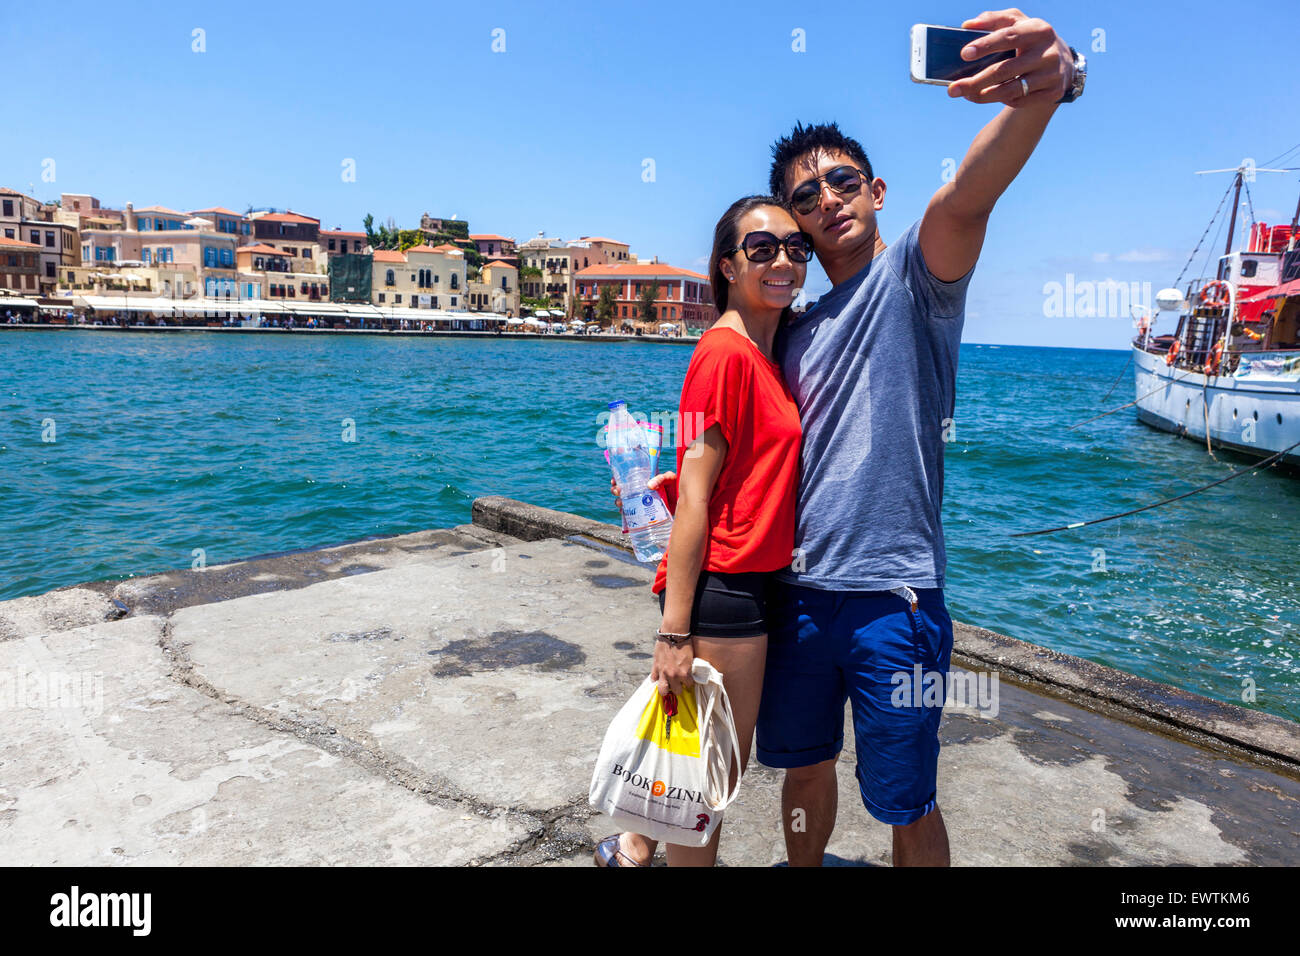 Tourists Taking Selfie on Smartphone Mobil Phone Snapshot Young Couple Happy People Man Woman Old Venetian Port Chania Crete Greece Europe Tourism Stock Photo